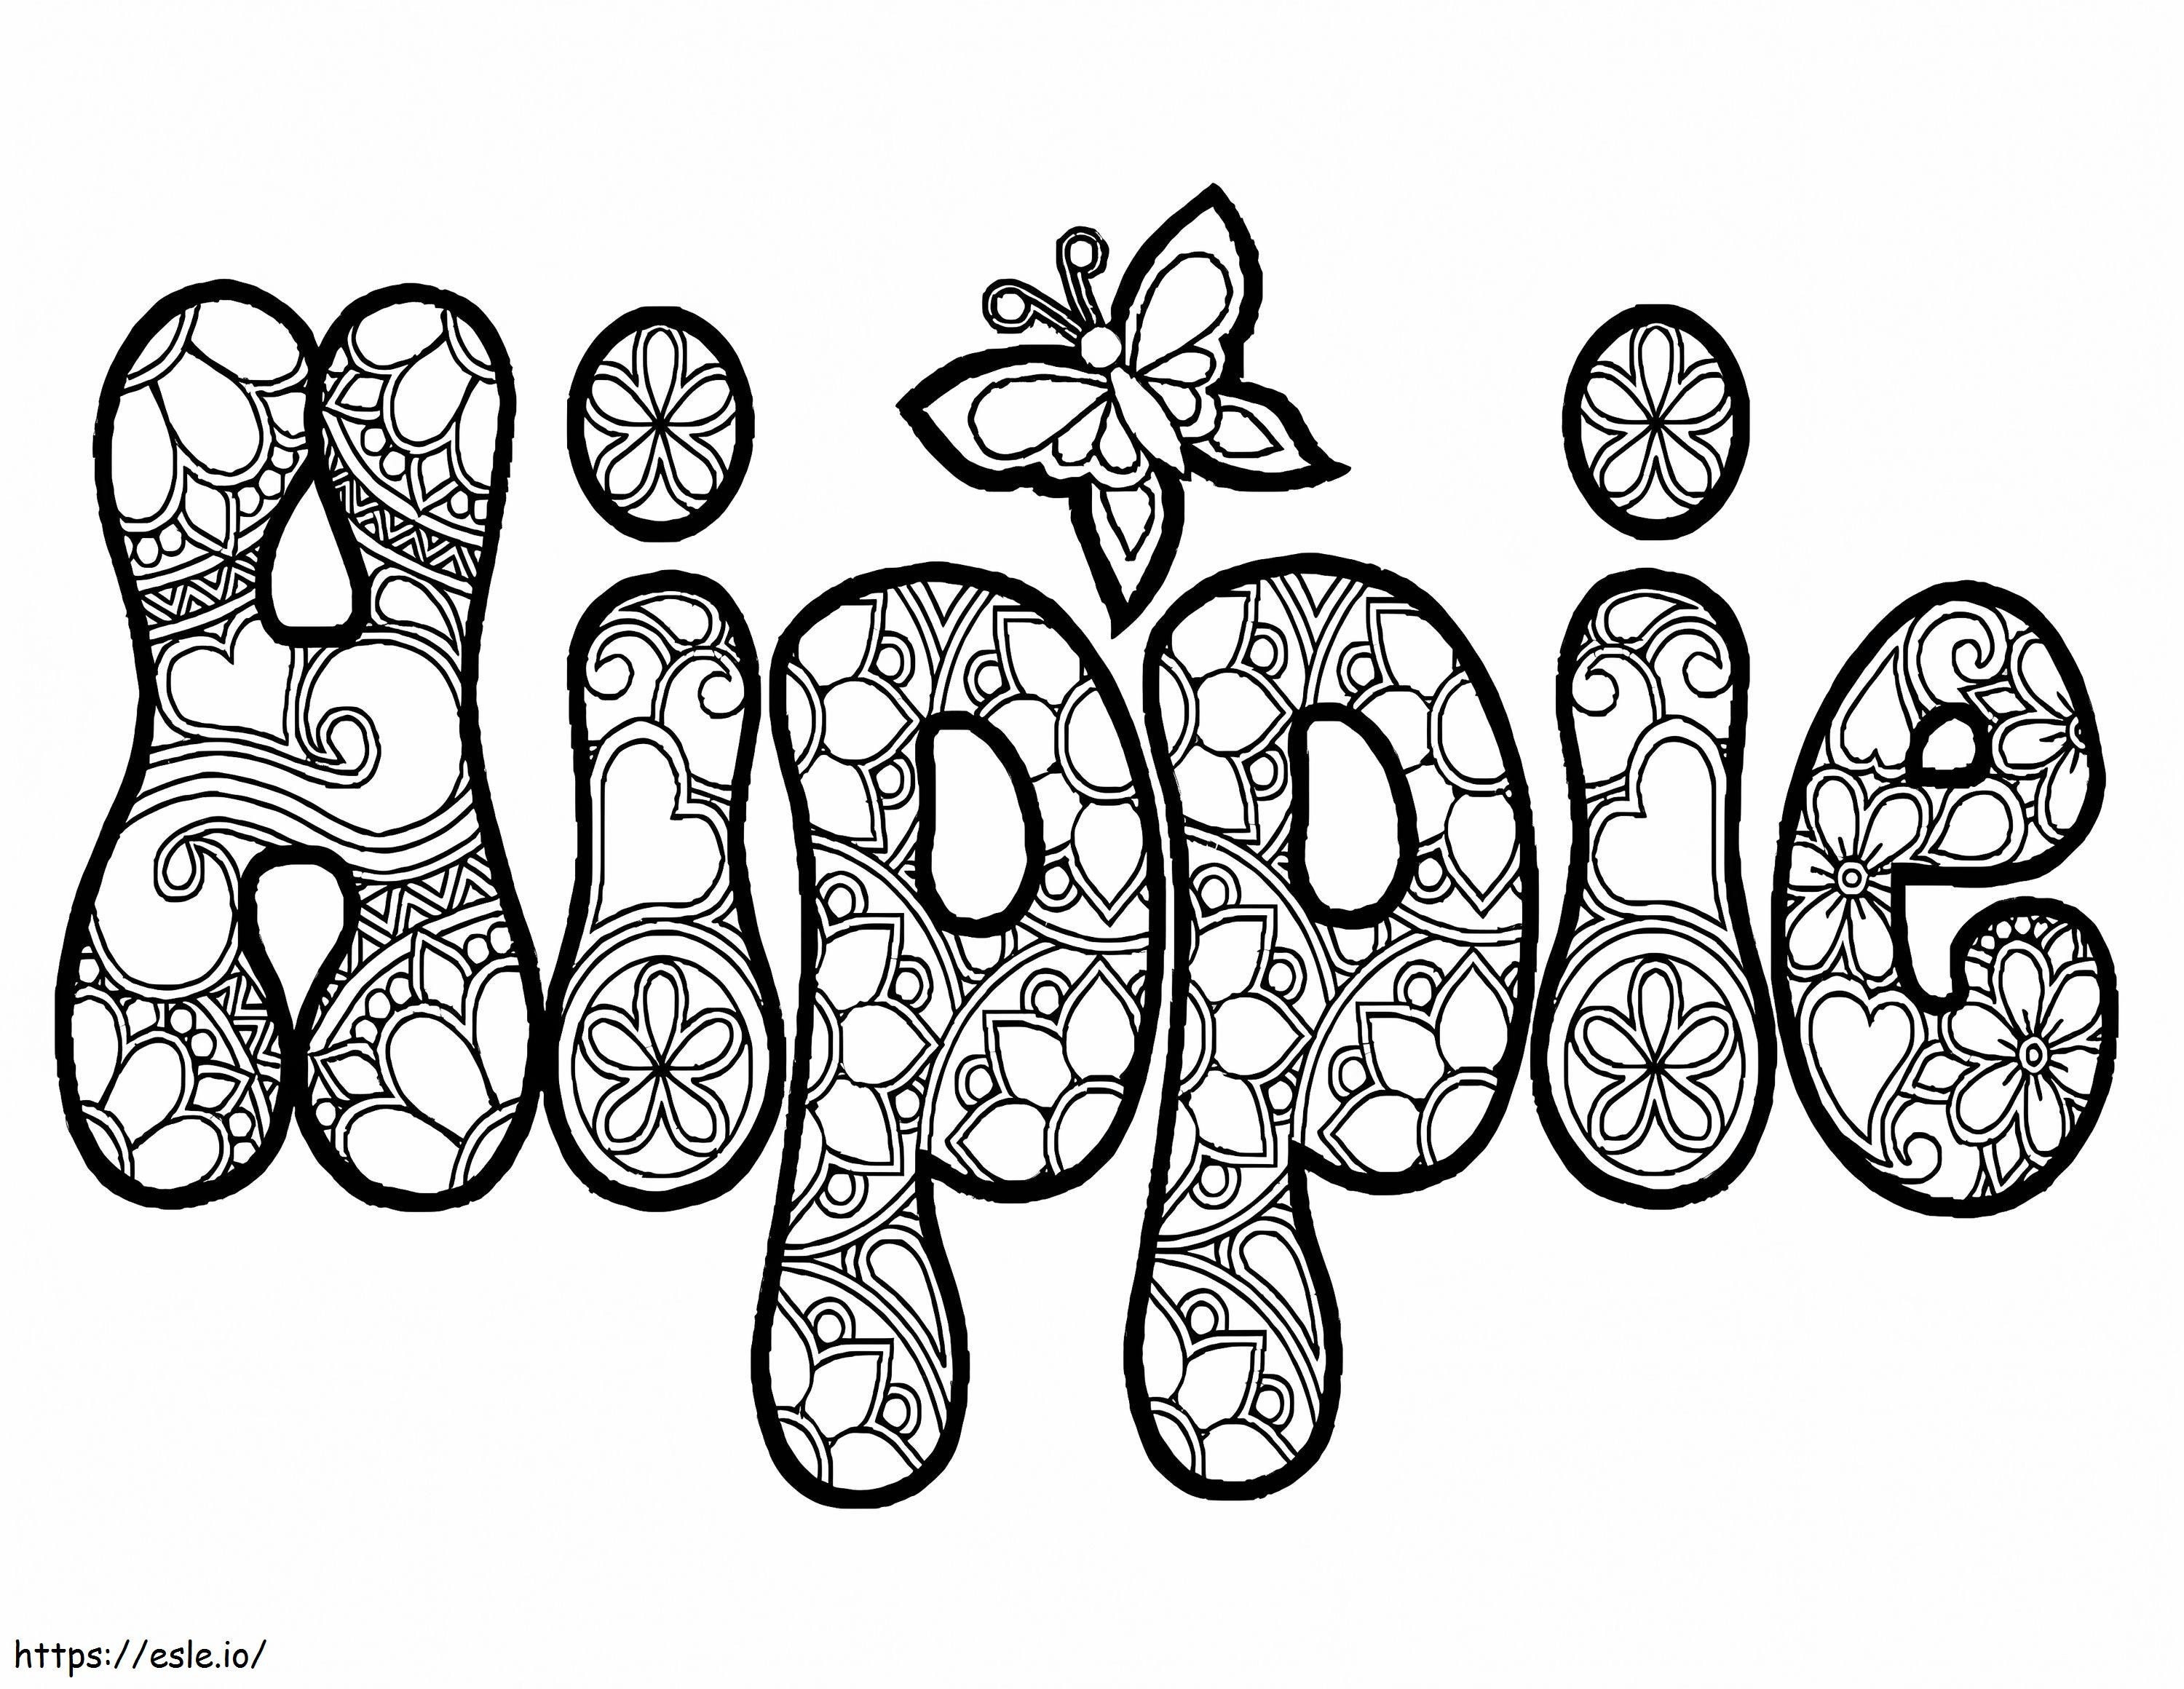 Word Hippie coloring page